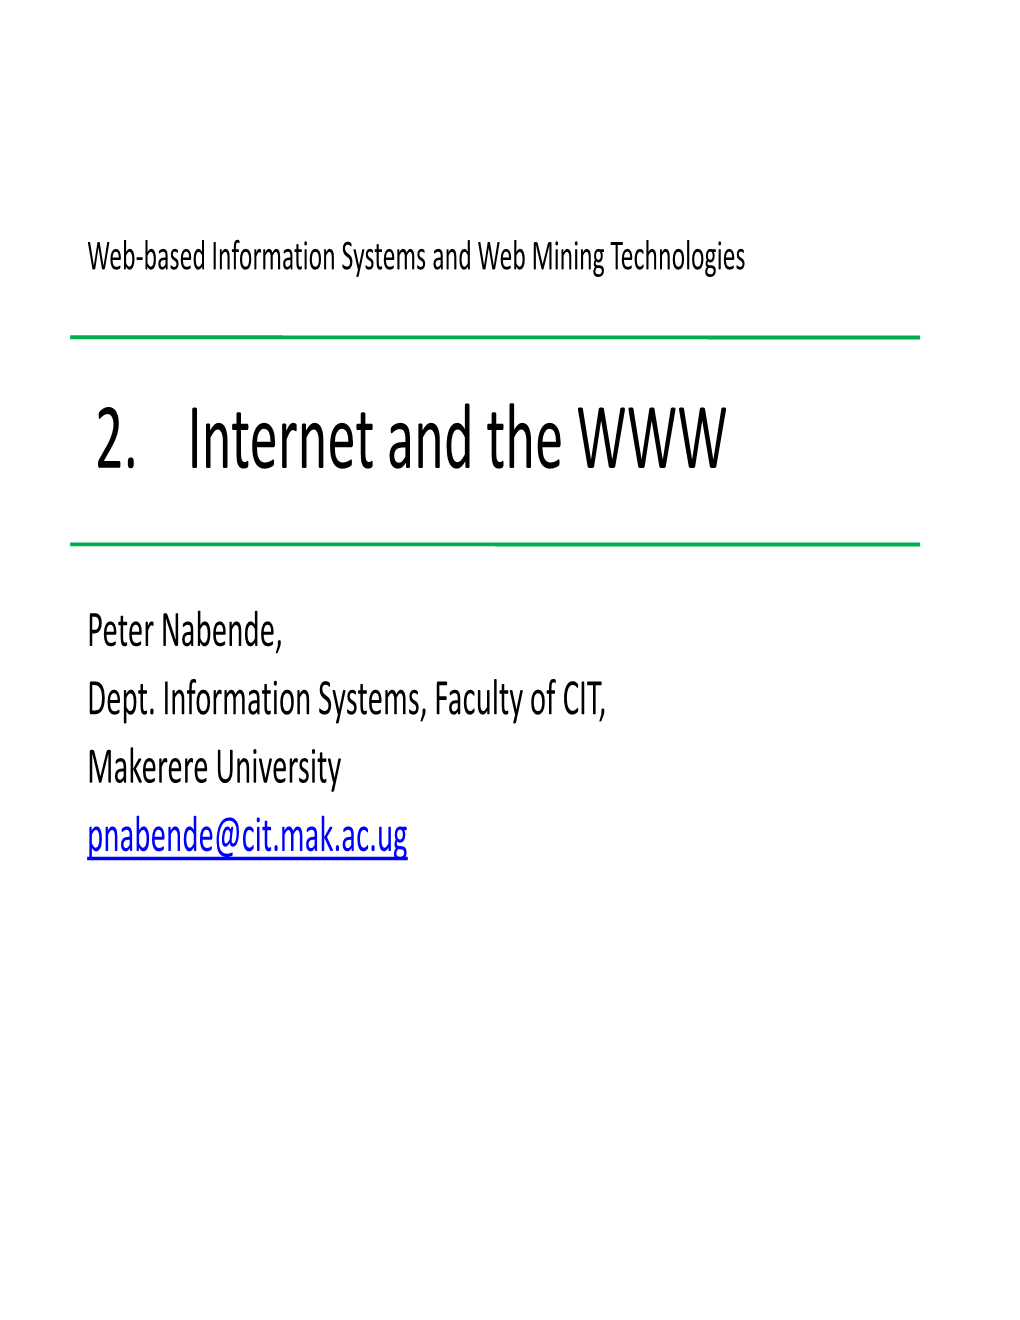 2. Internet and the WWW